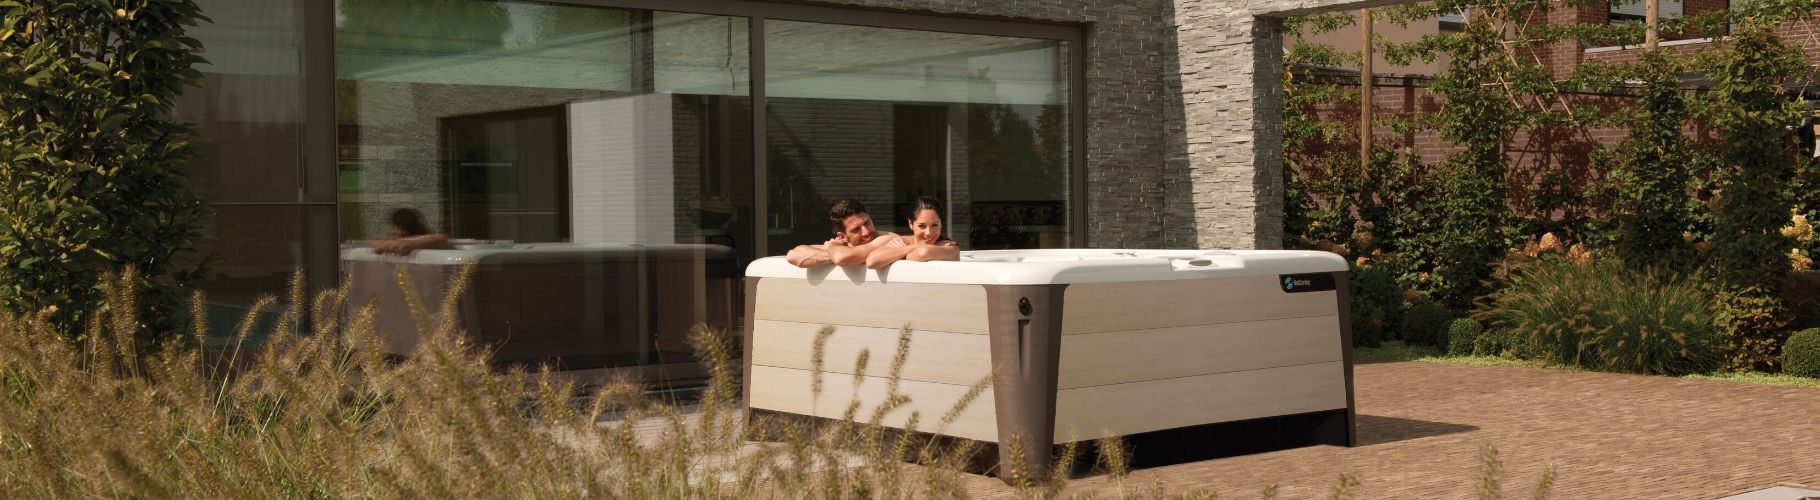 jacuzzi tuin jacuzzi in tuin jacuzzi spa